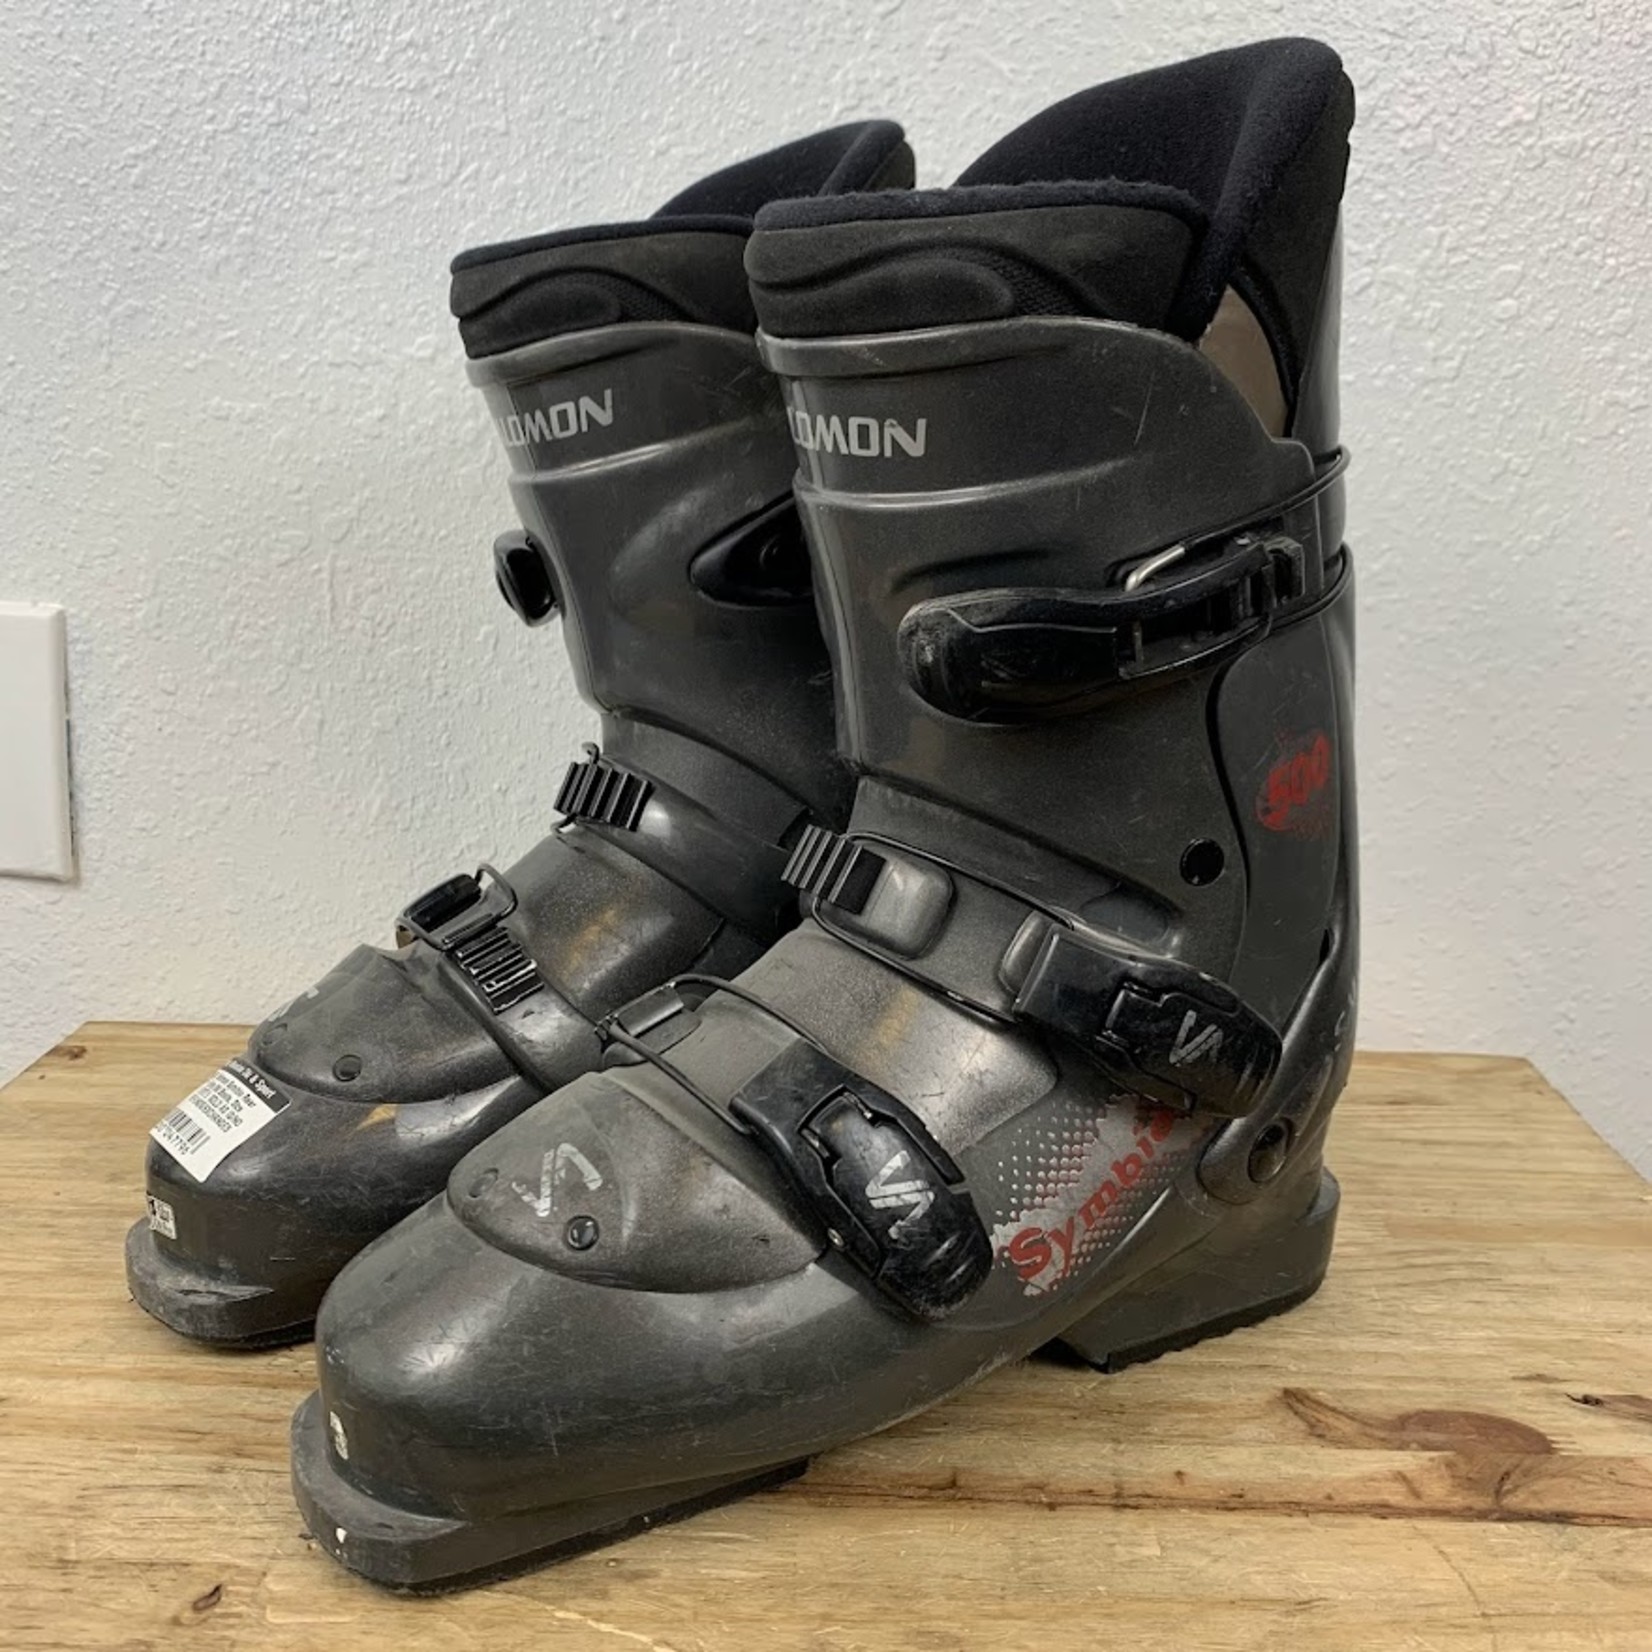 Salomon Symbio Rear Entry Ski Boots, Size 23/23.5  SOLD AS IS/NO REFUNDS/EXCHANGES